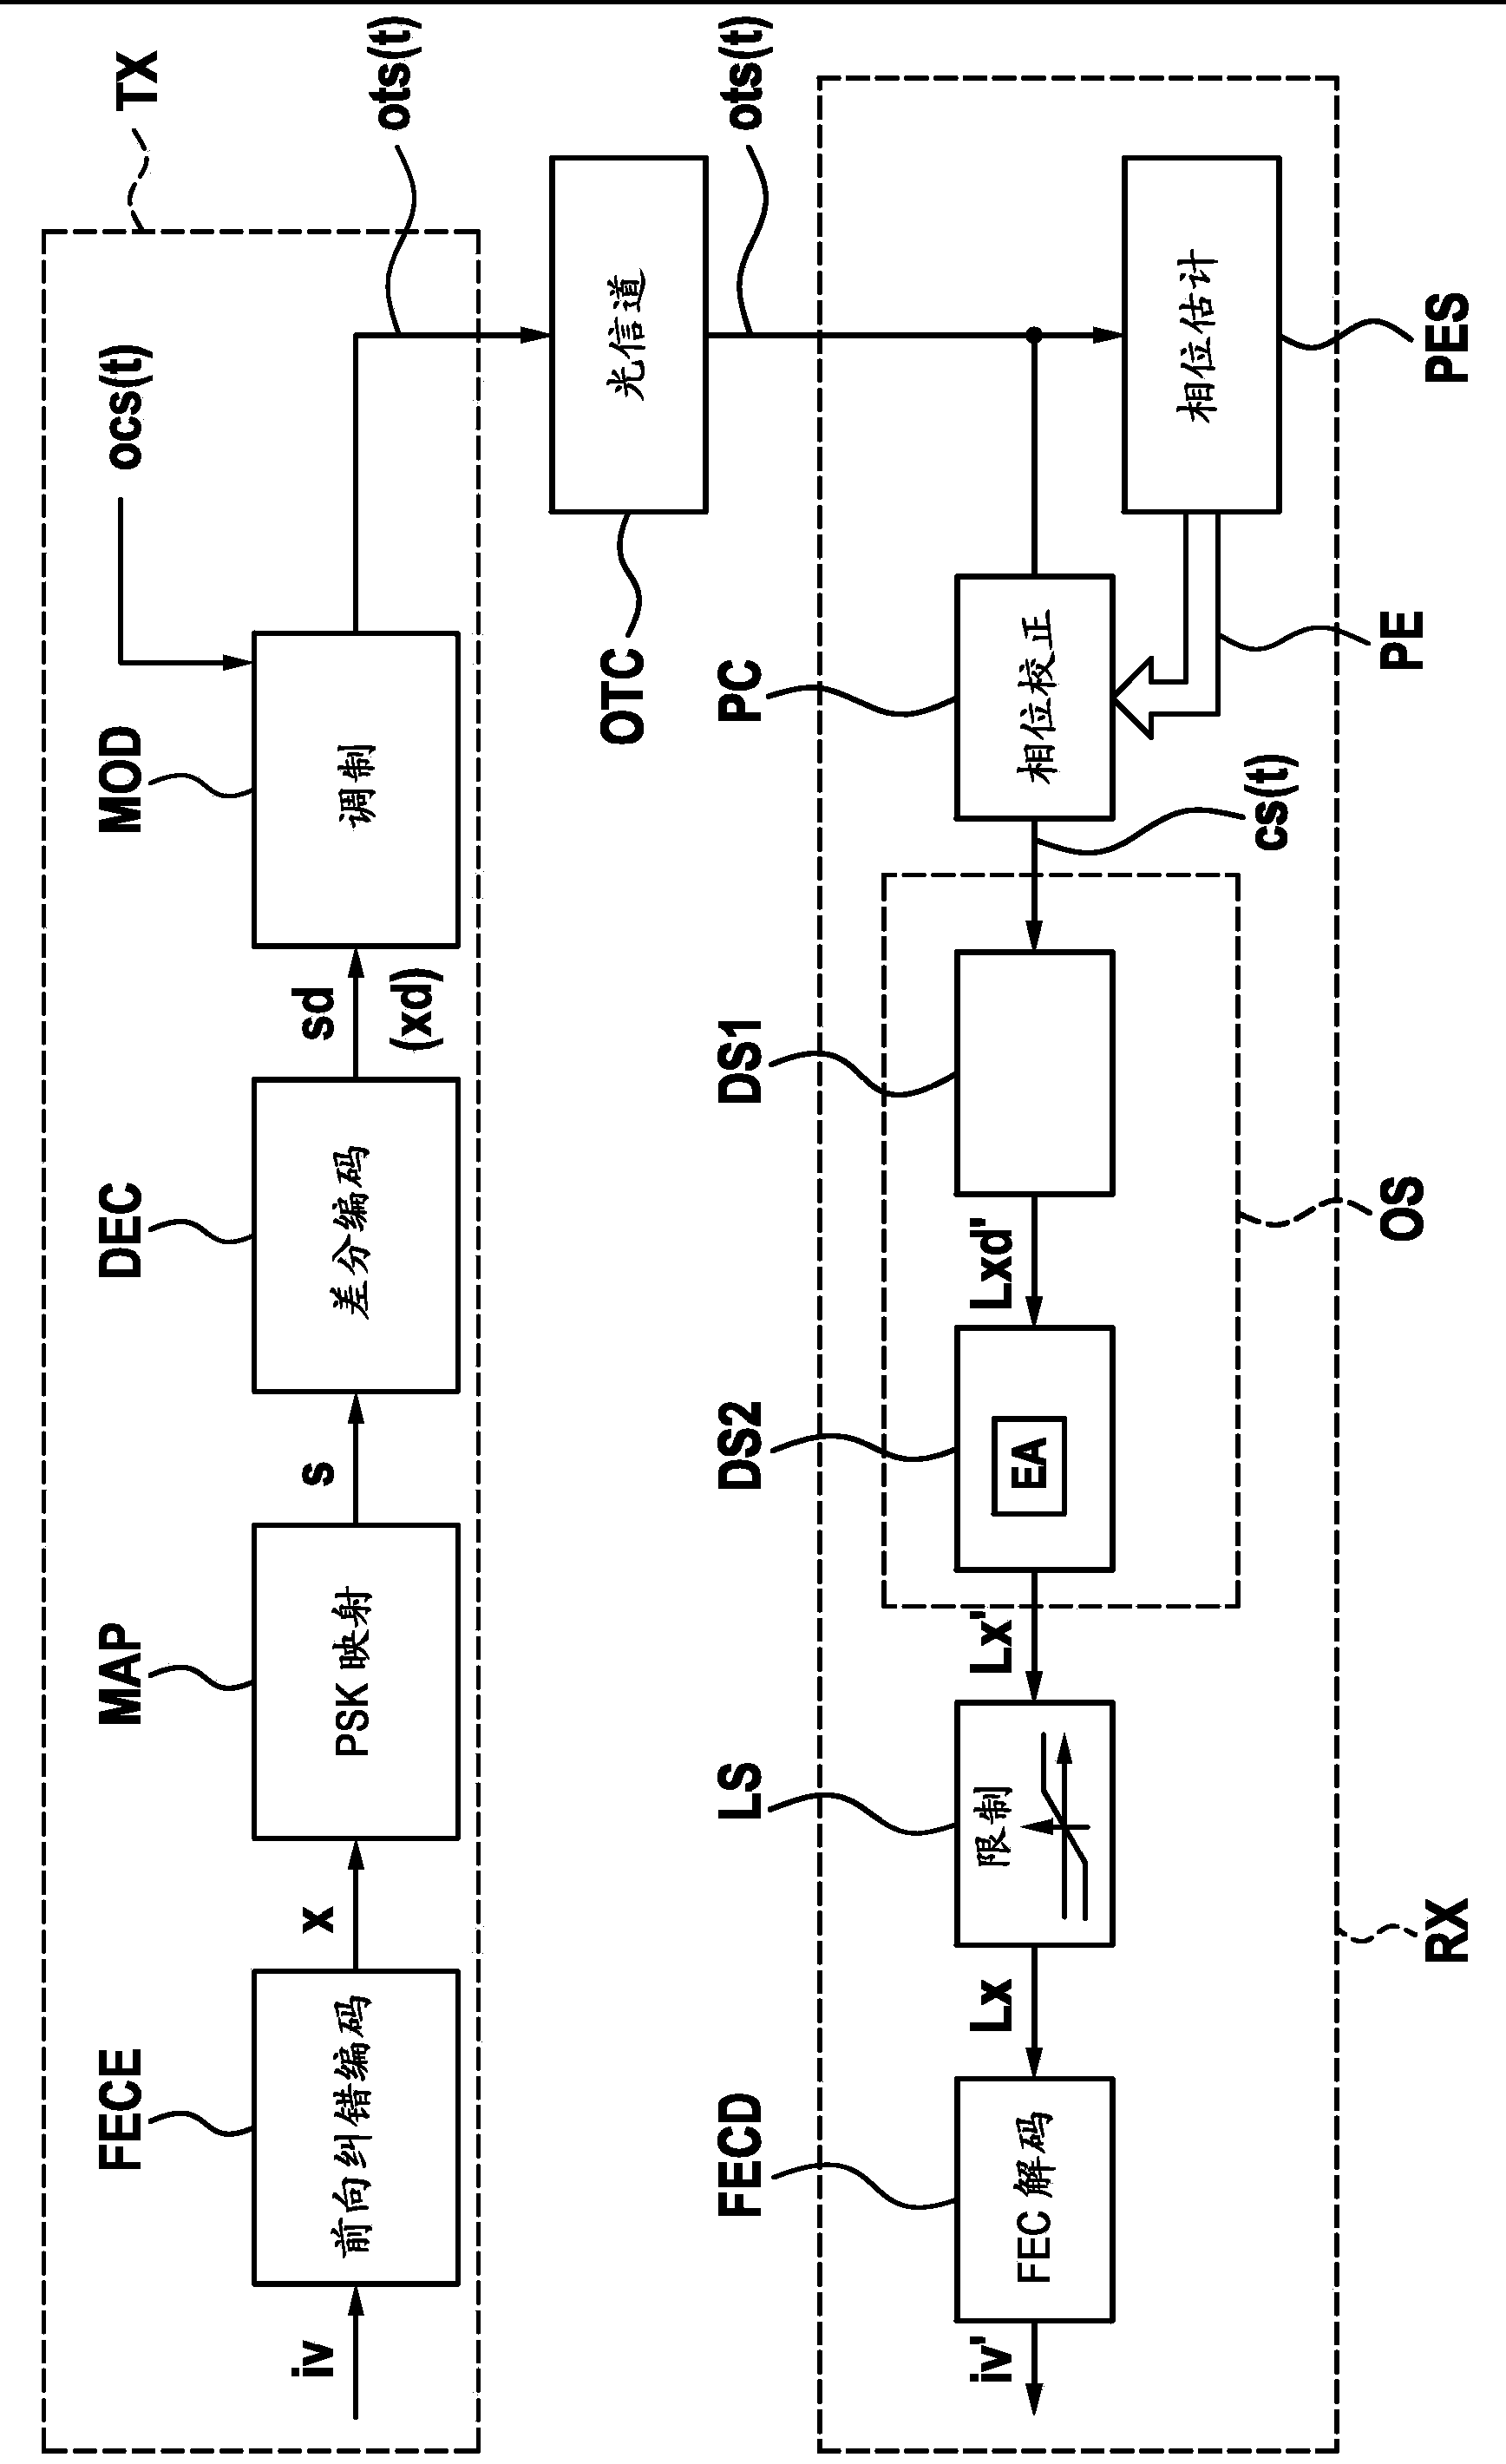 Method of decoding a differentially encoded phase modulated optical data signal